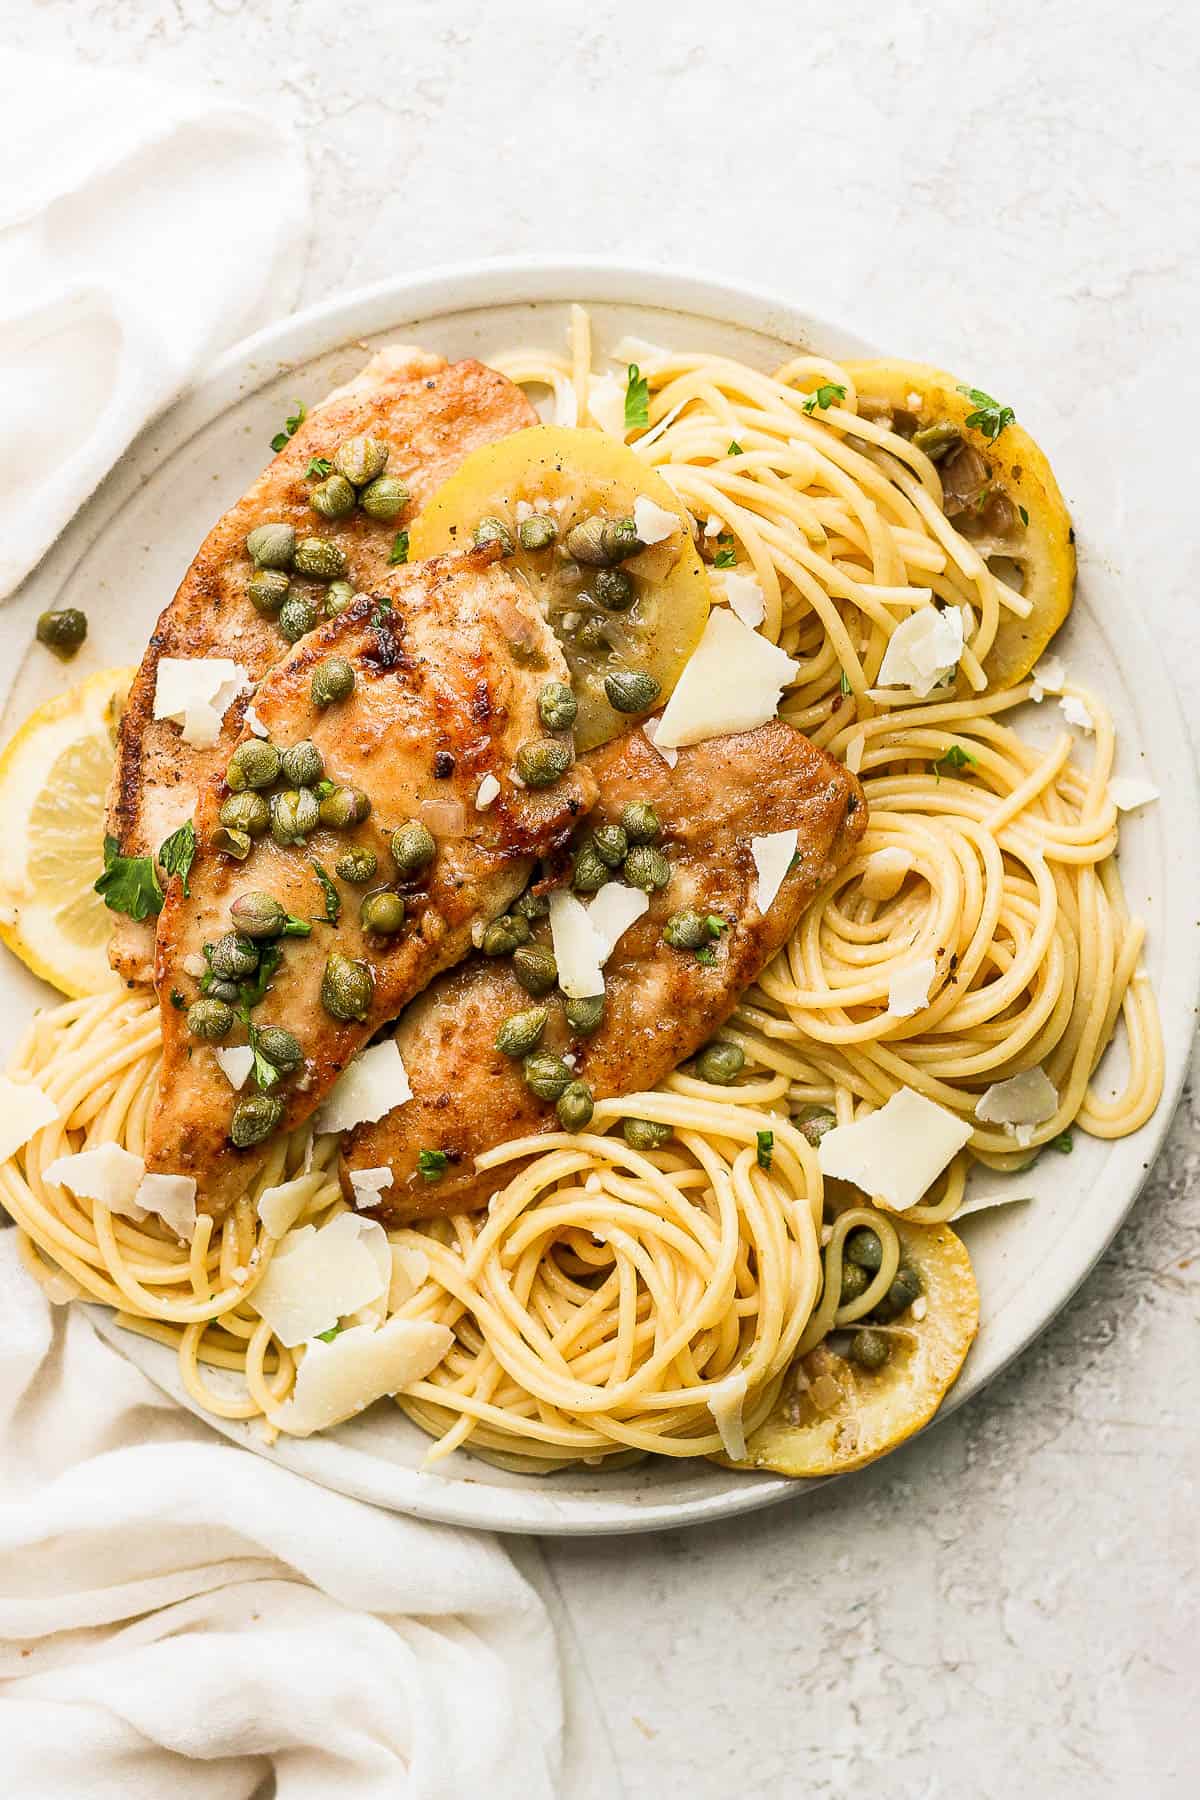 Chicken piccata served on top of spaghetti noodles with shaved parmesan sprinkled on top.